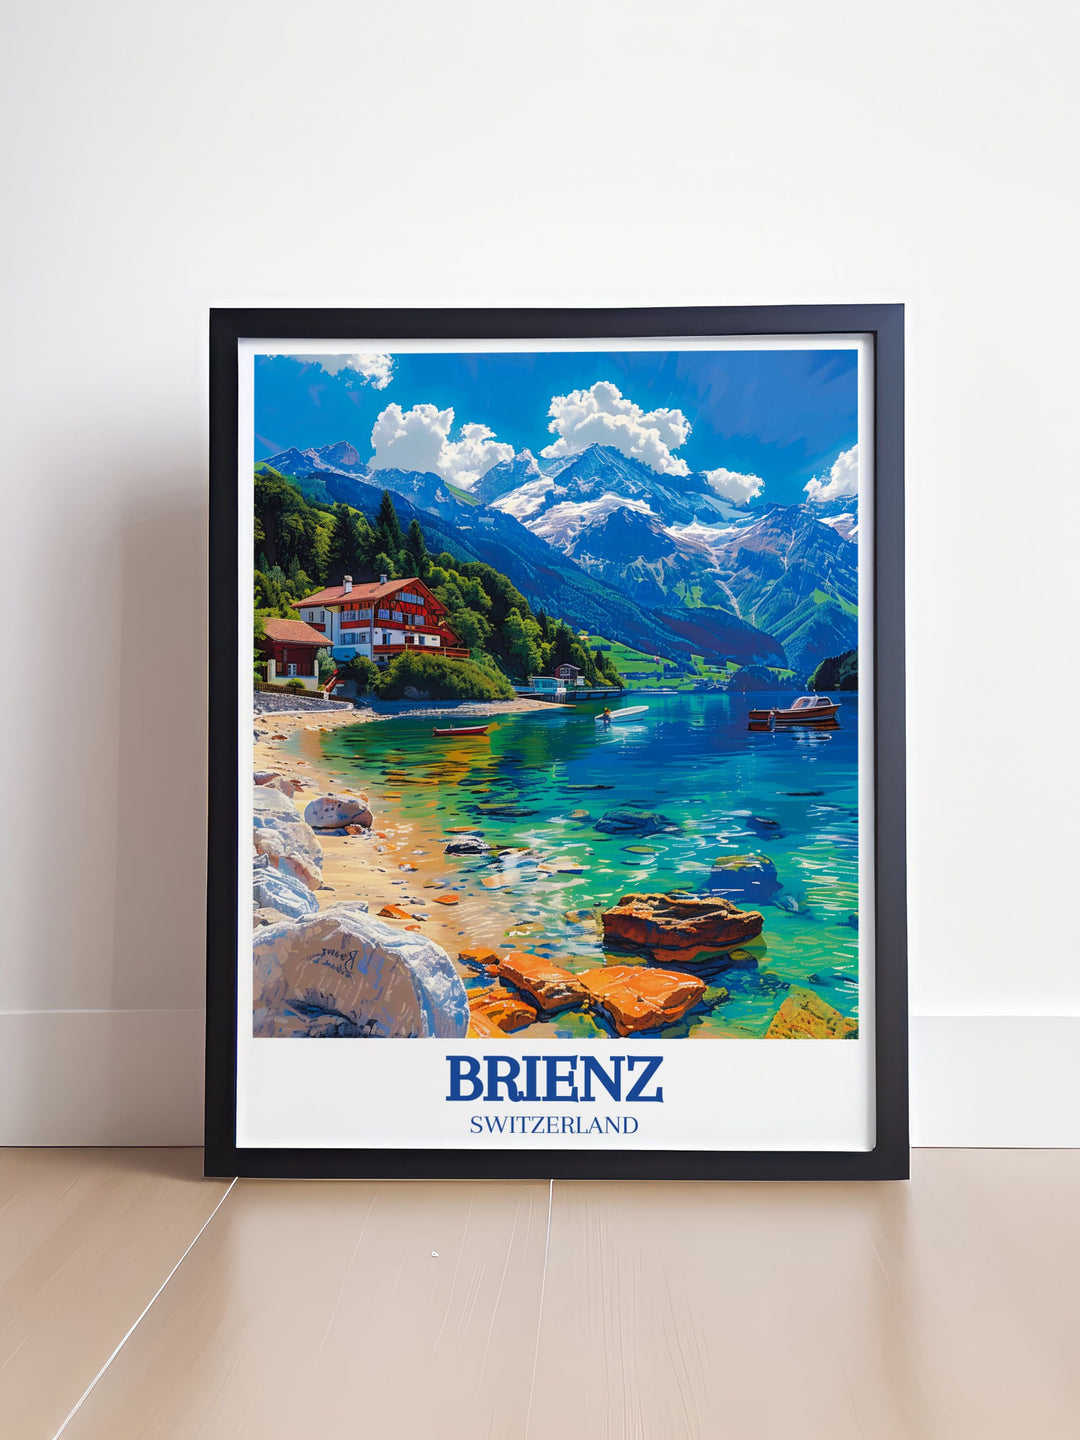 Vintage travel print featuring Lake Brienz, Brienzer Rothorn. This retro travel poster captures the serene landscapes of the Swiss Alps. Great for framing and displaying in any living space.